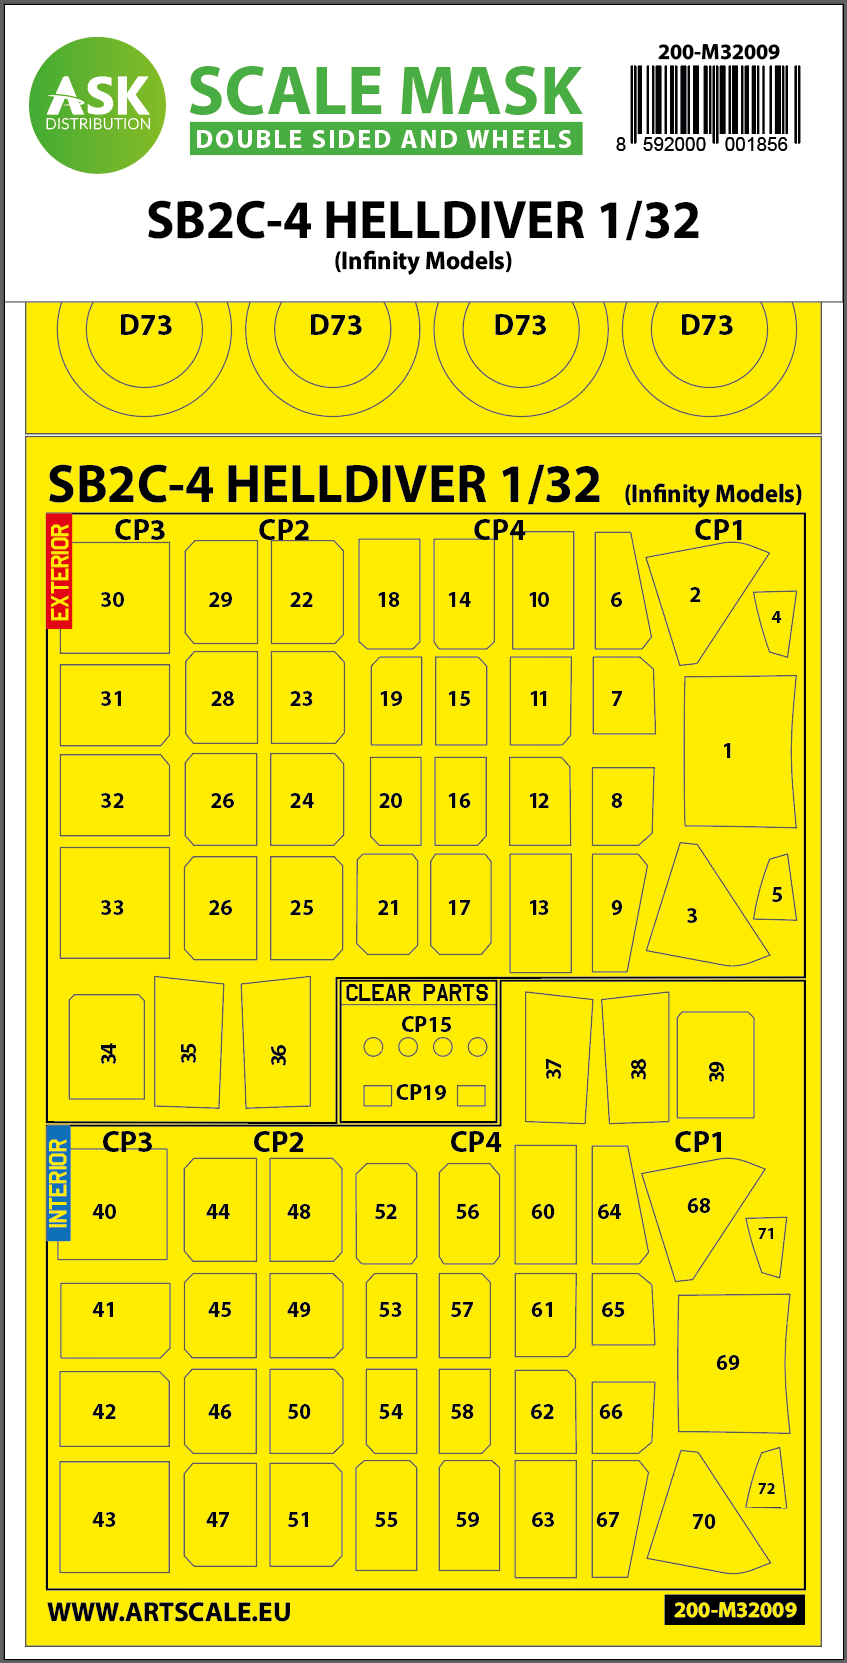 1/32 SB2C-4 Helldiver double-sided express mask for Infinity kit